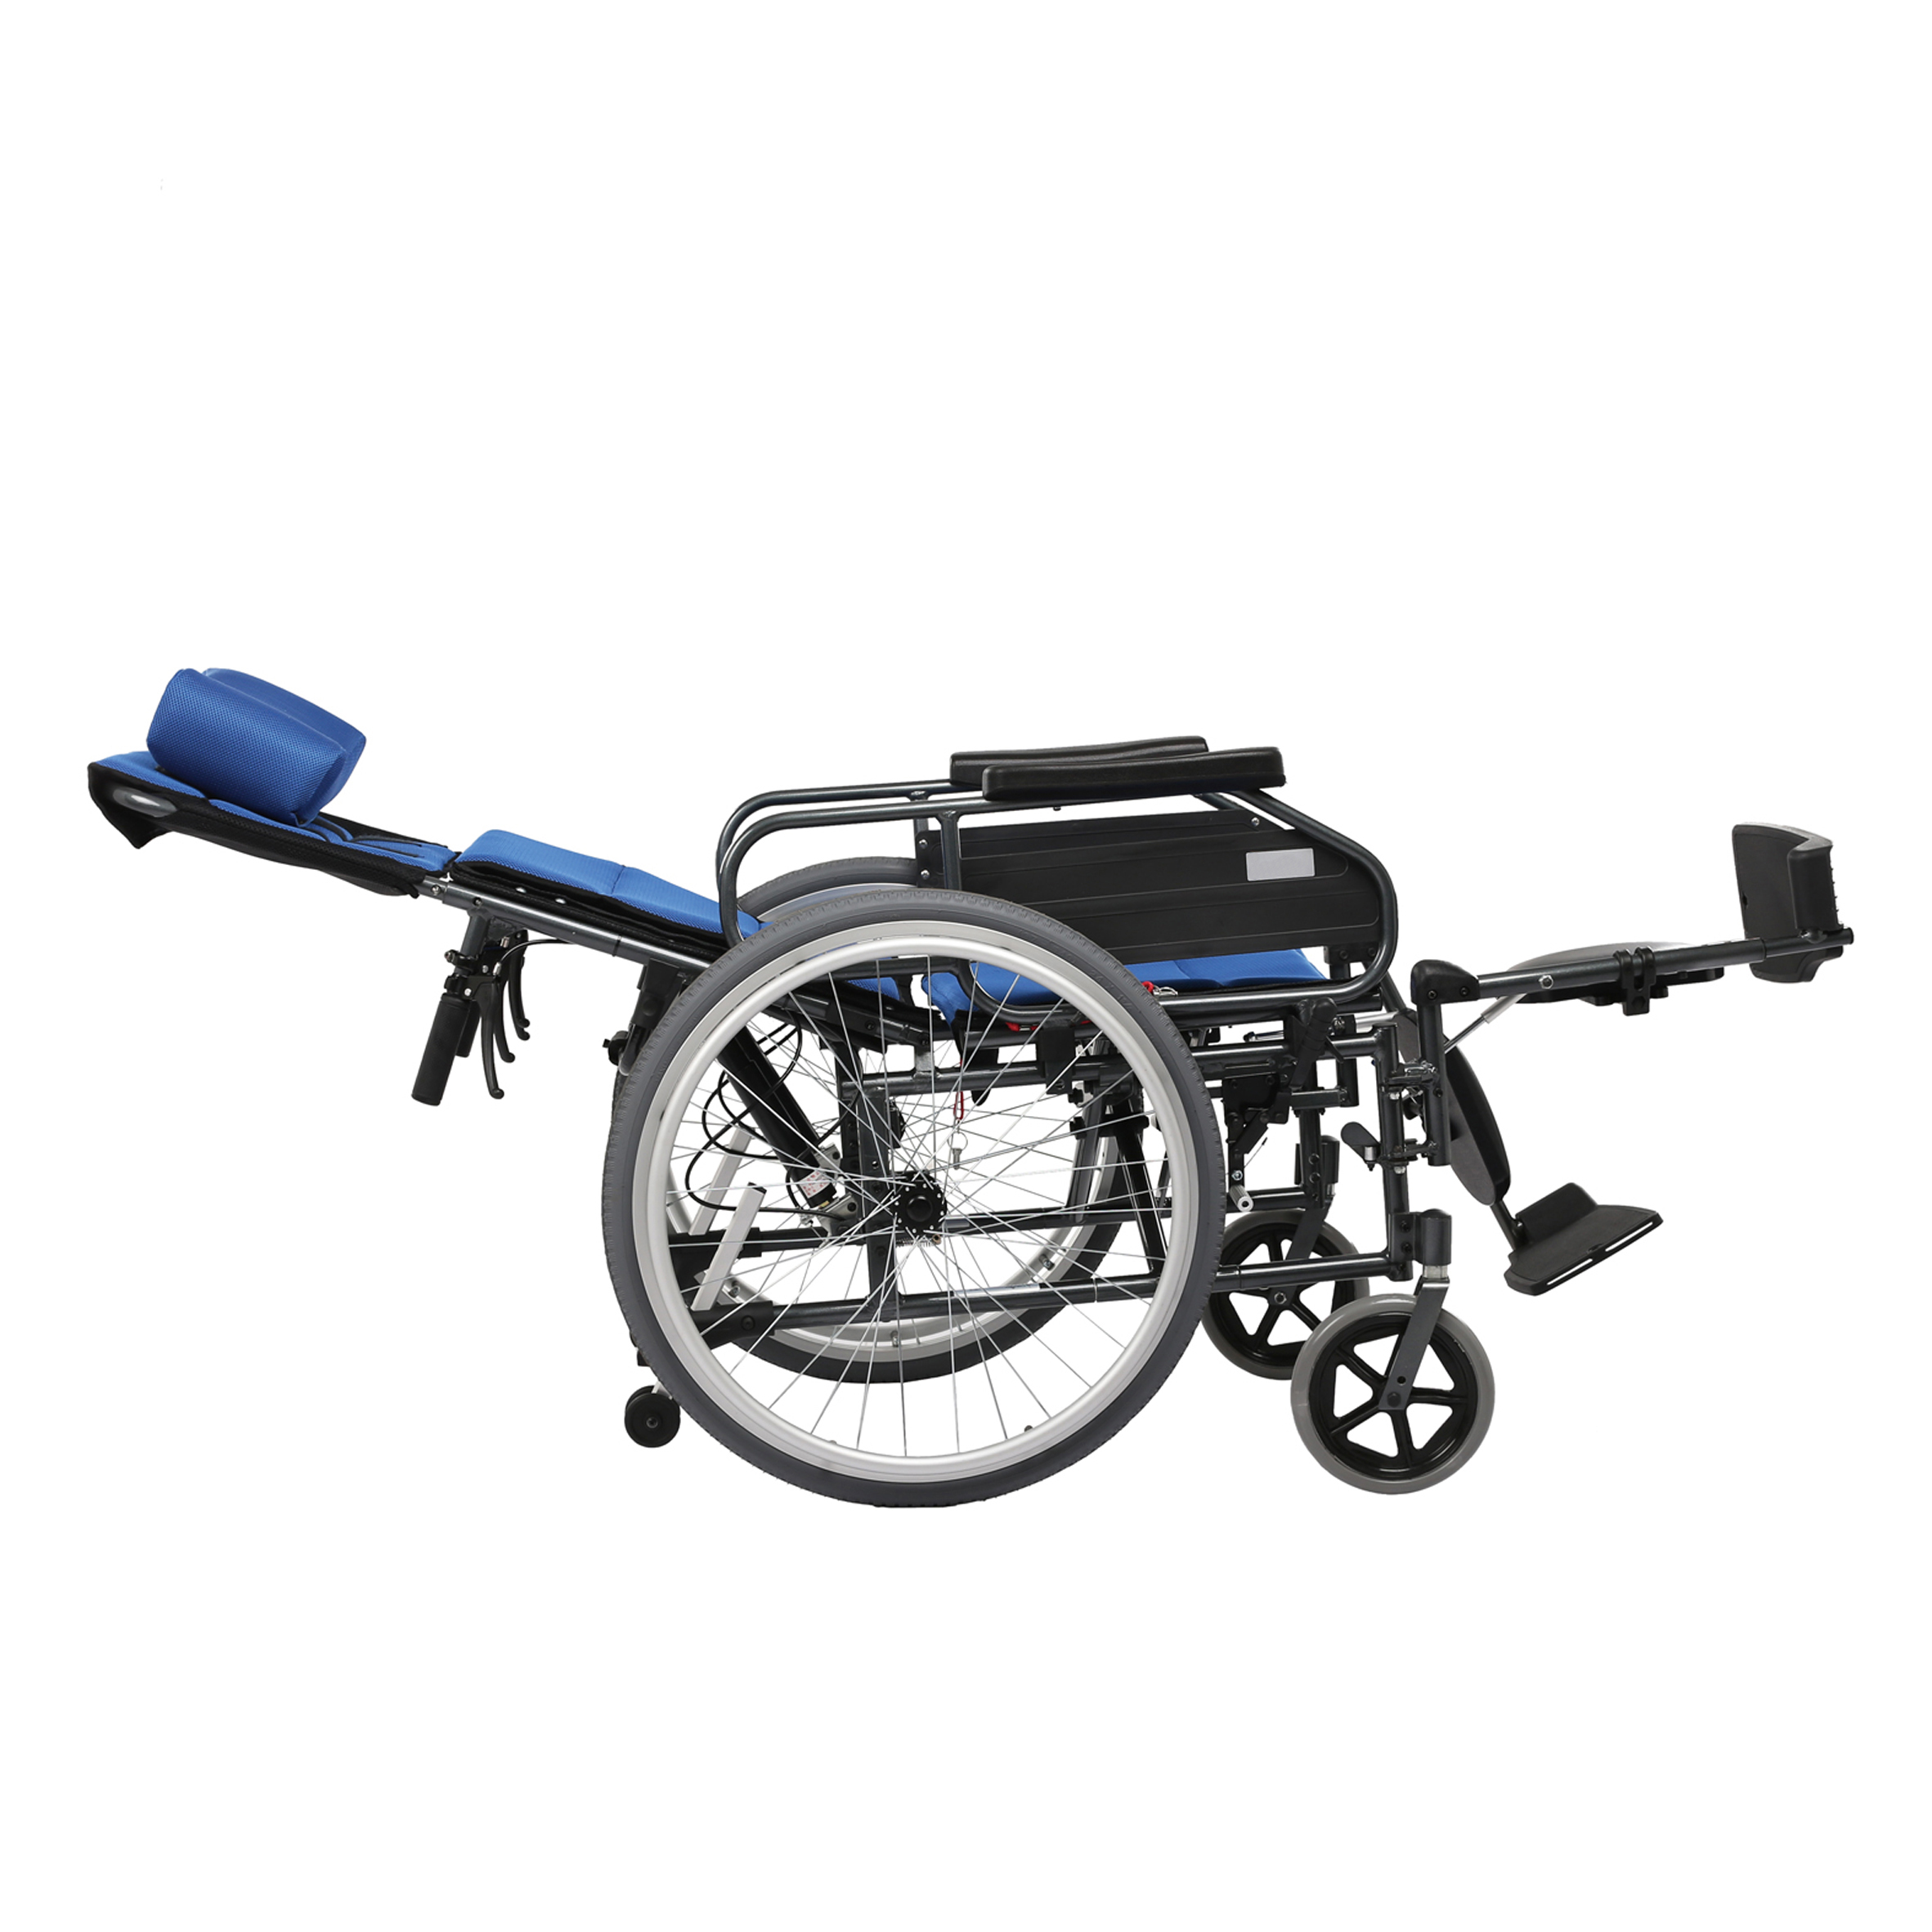 An Electric Wheelchair Can Last for Several Years